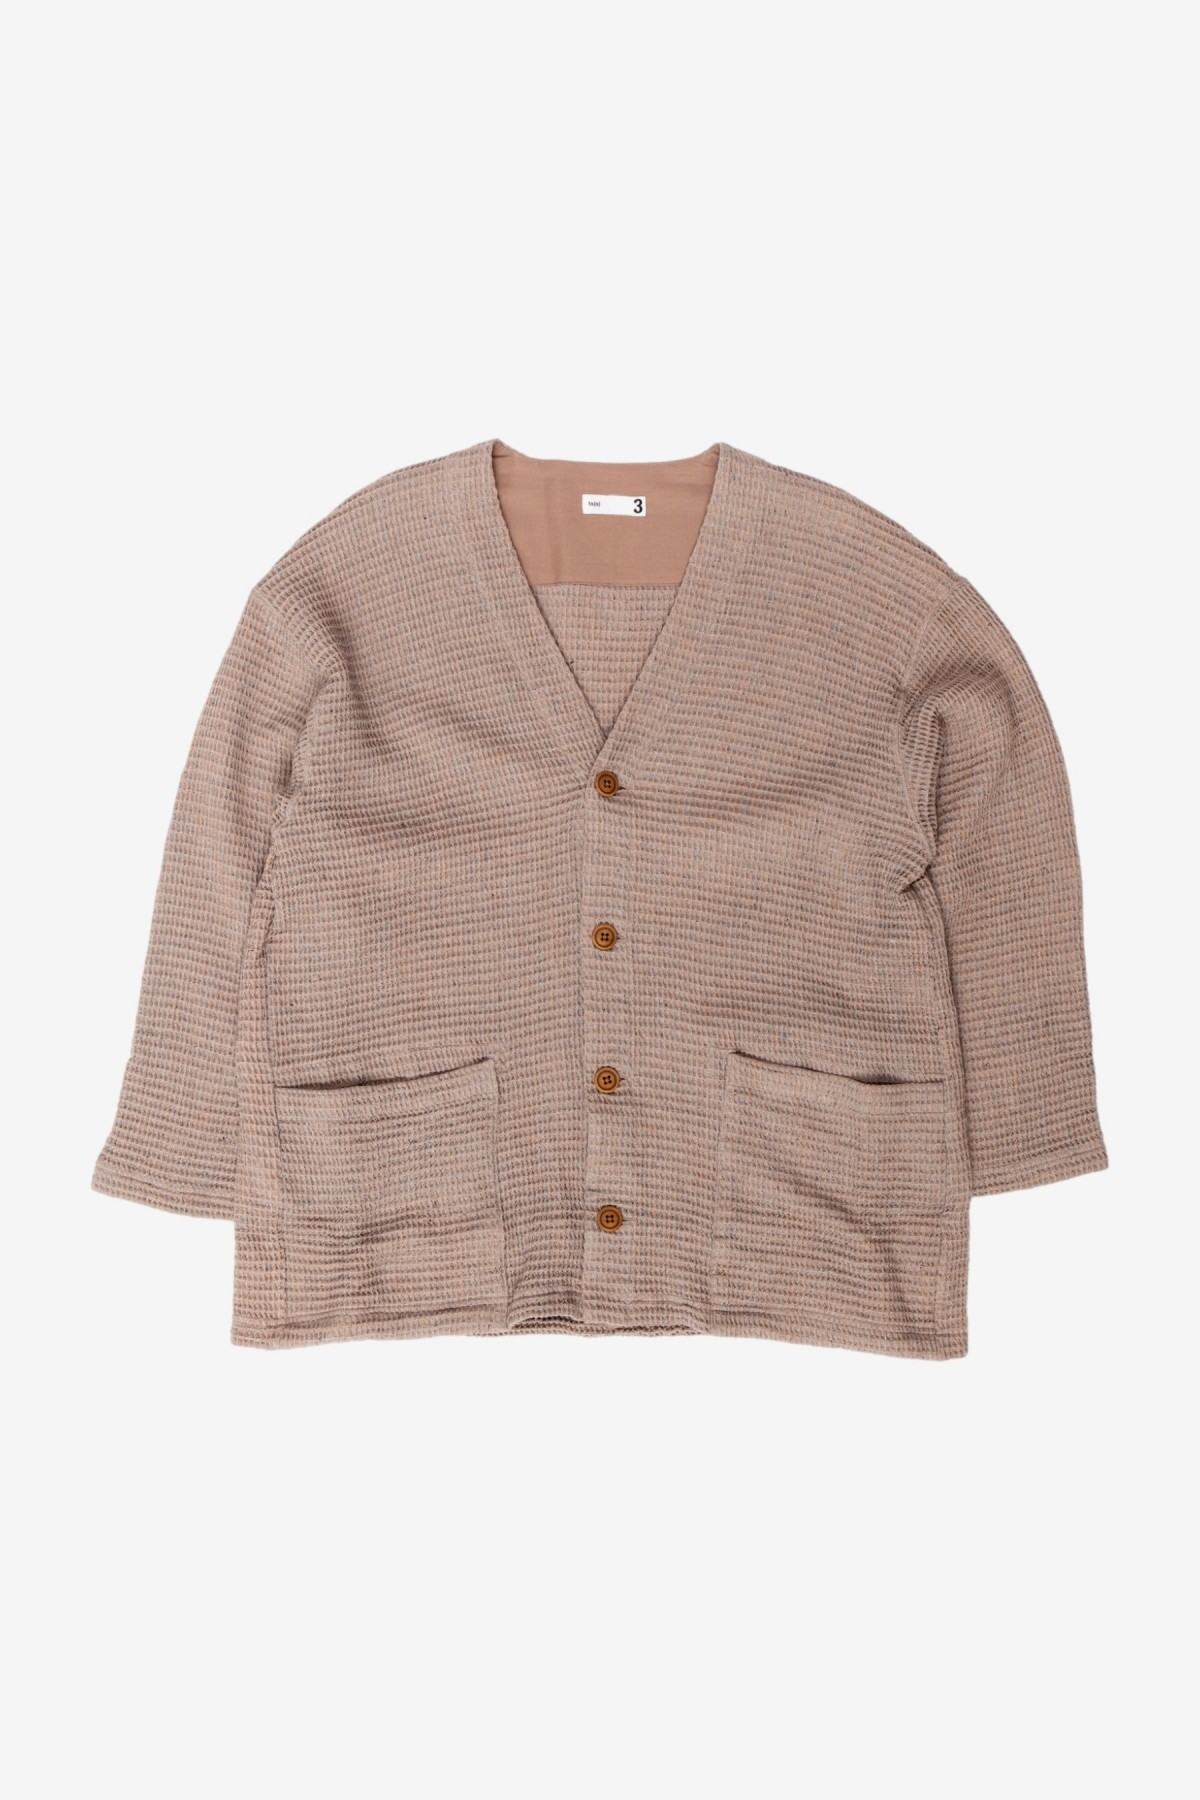 Ts(s) Easy Cardigan in Maple